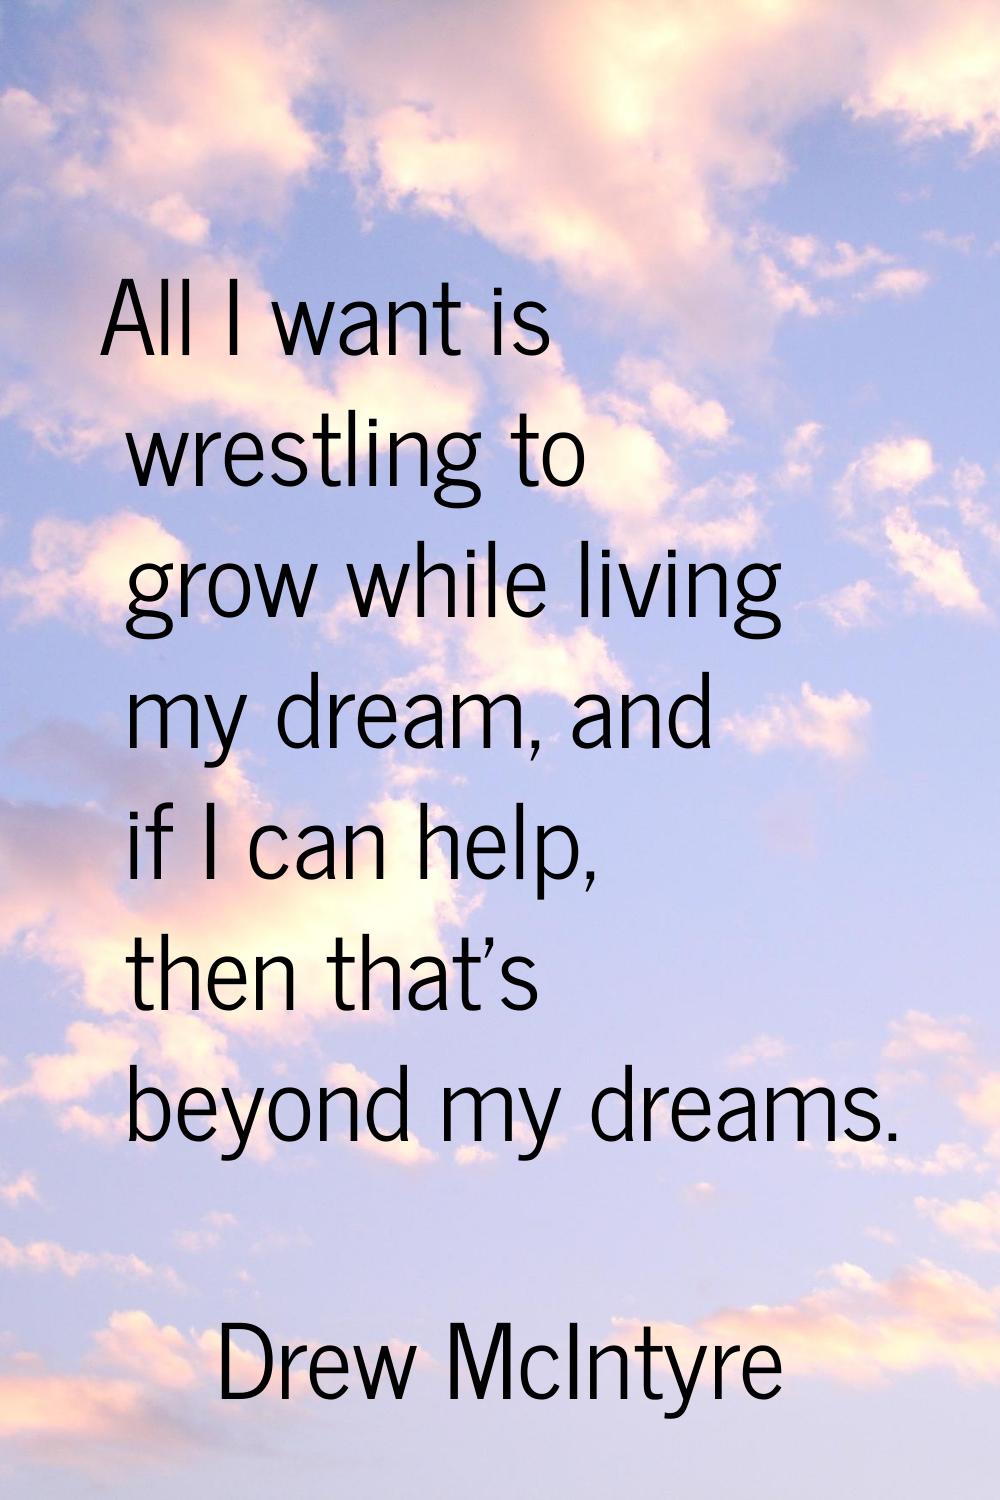 All I want is wrestling to grow while living my dream, and if I can help, then that's beyond my dre